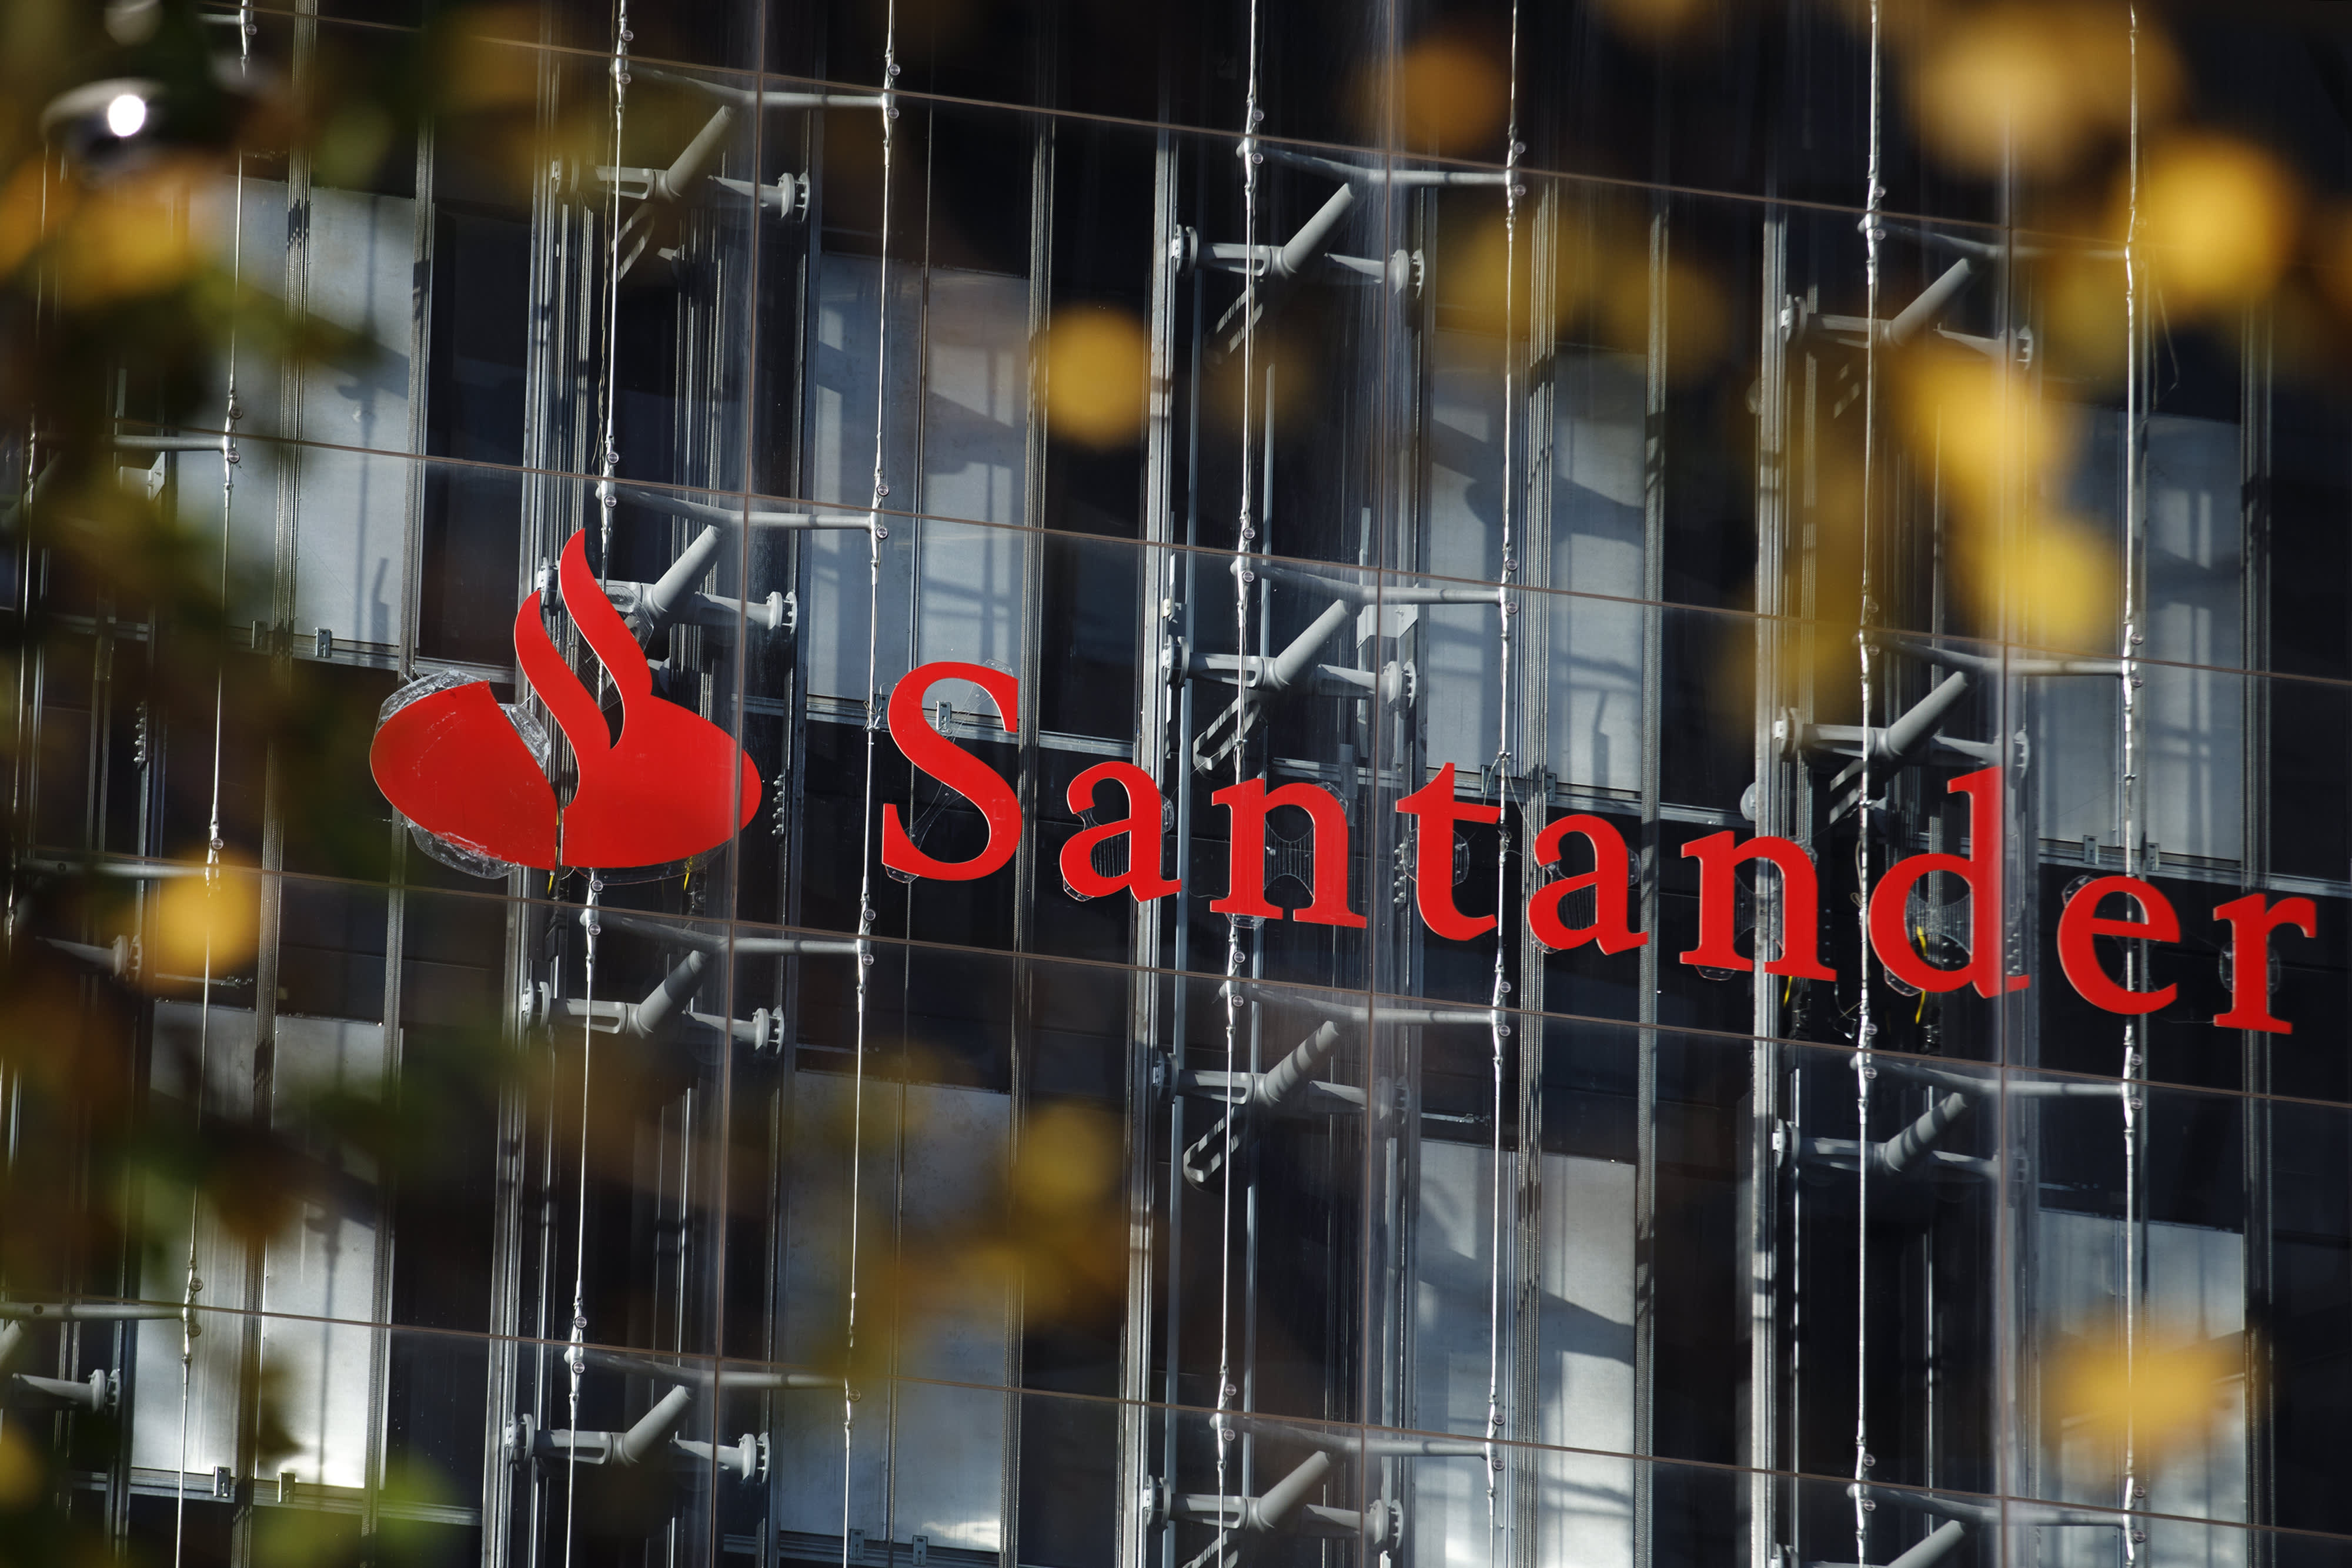 Santander launches a buy now, pay later service to take on fintech rivals